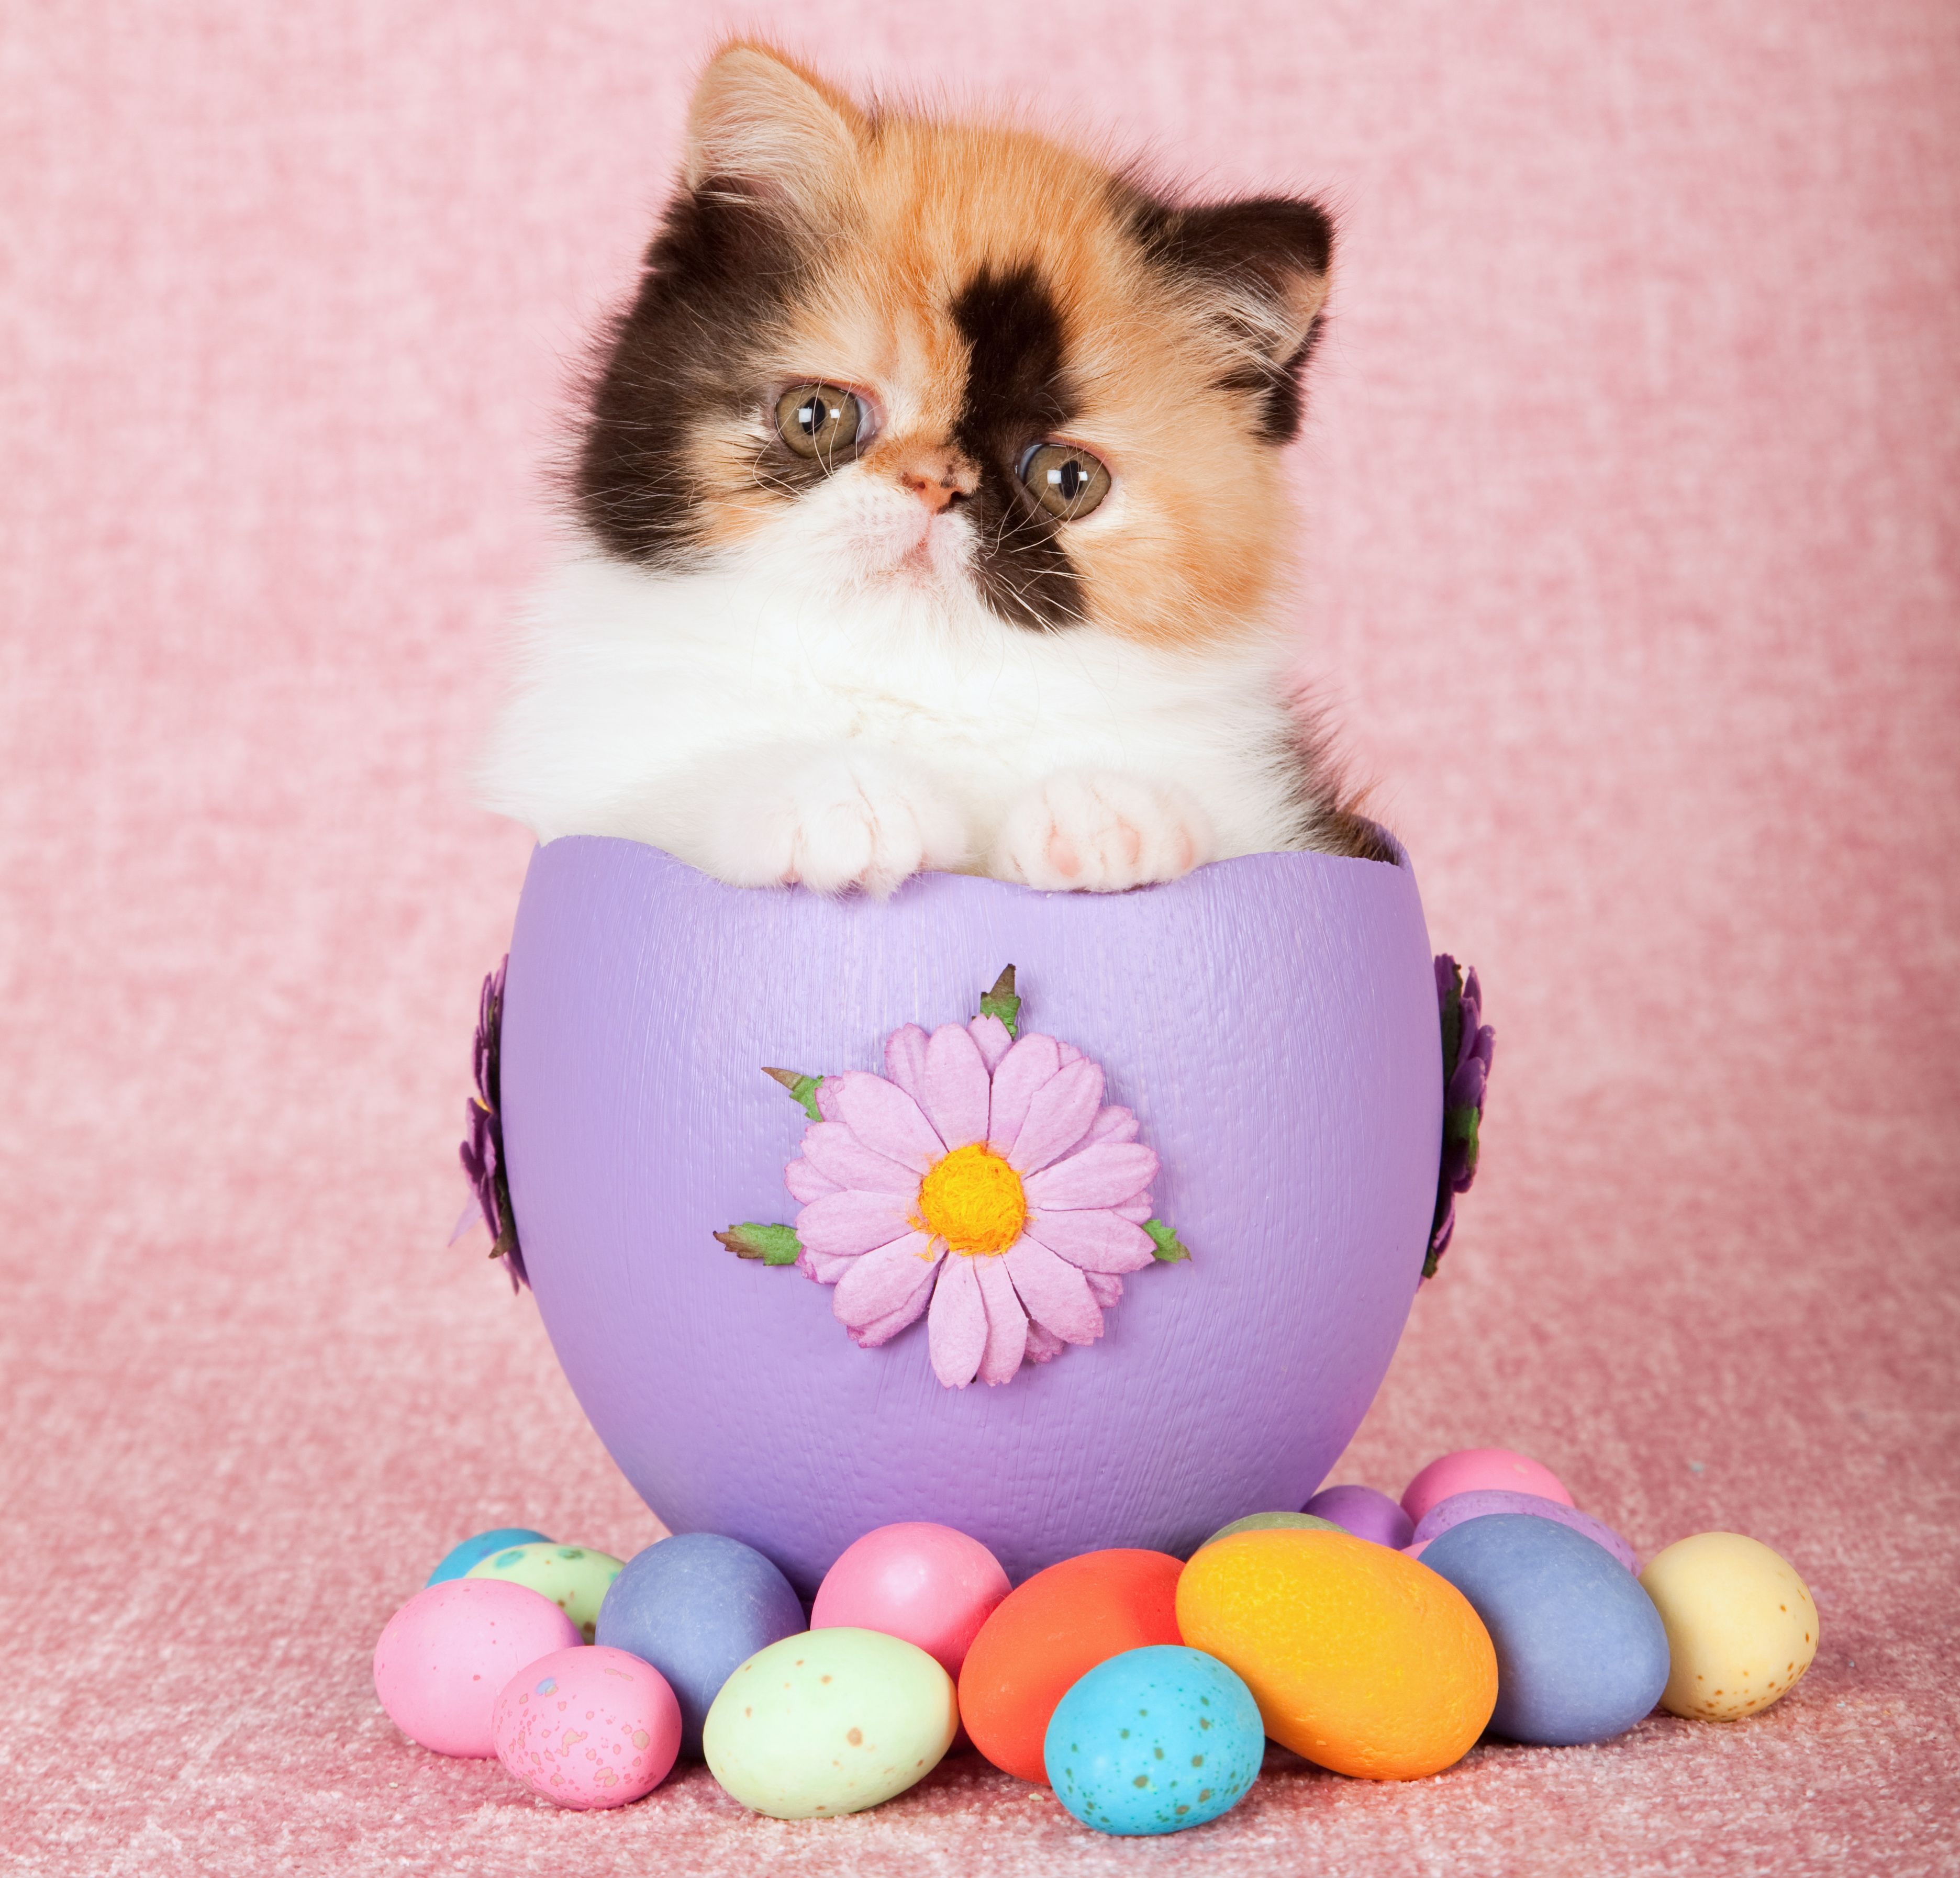 Easter Bunny Cat Wallpapers.